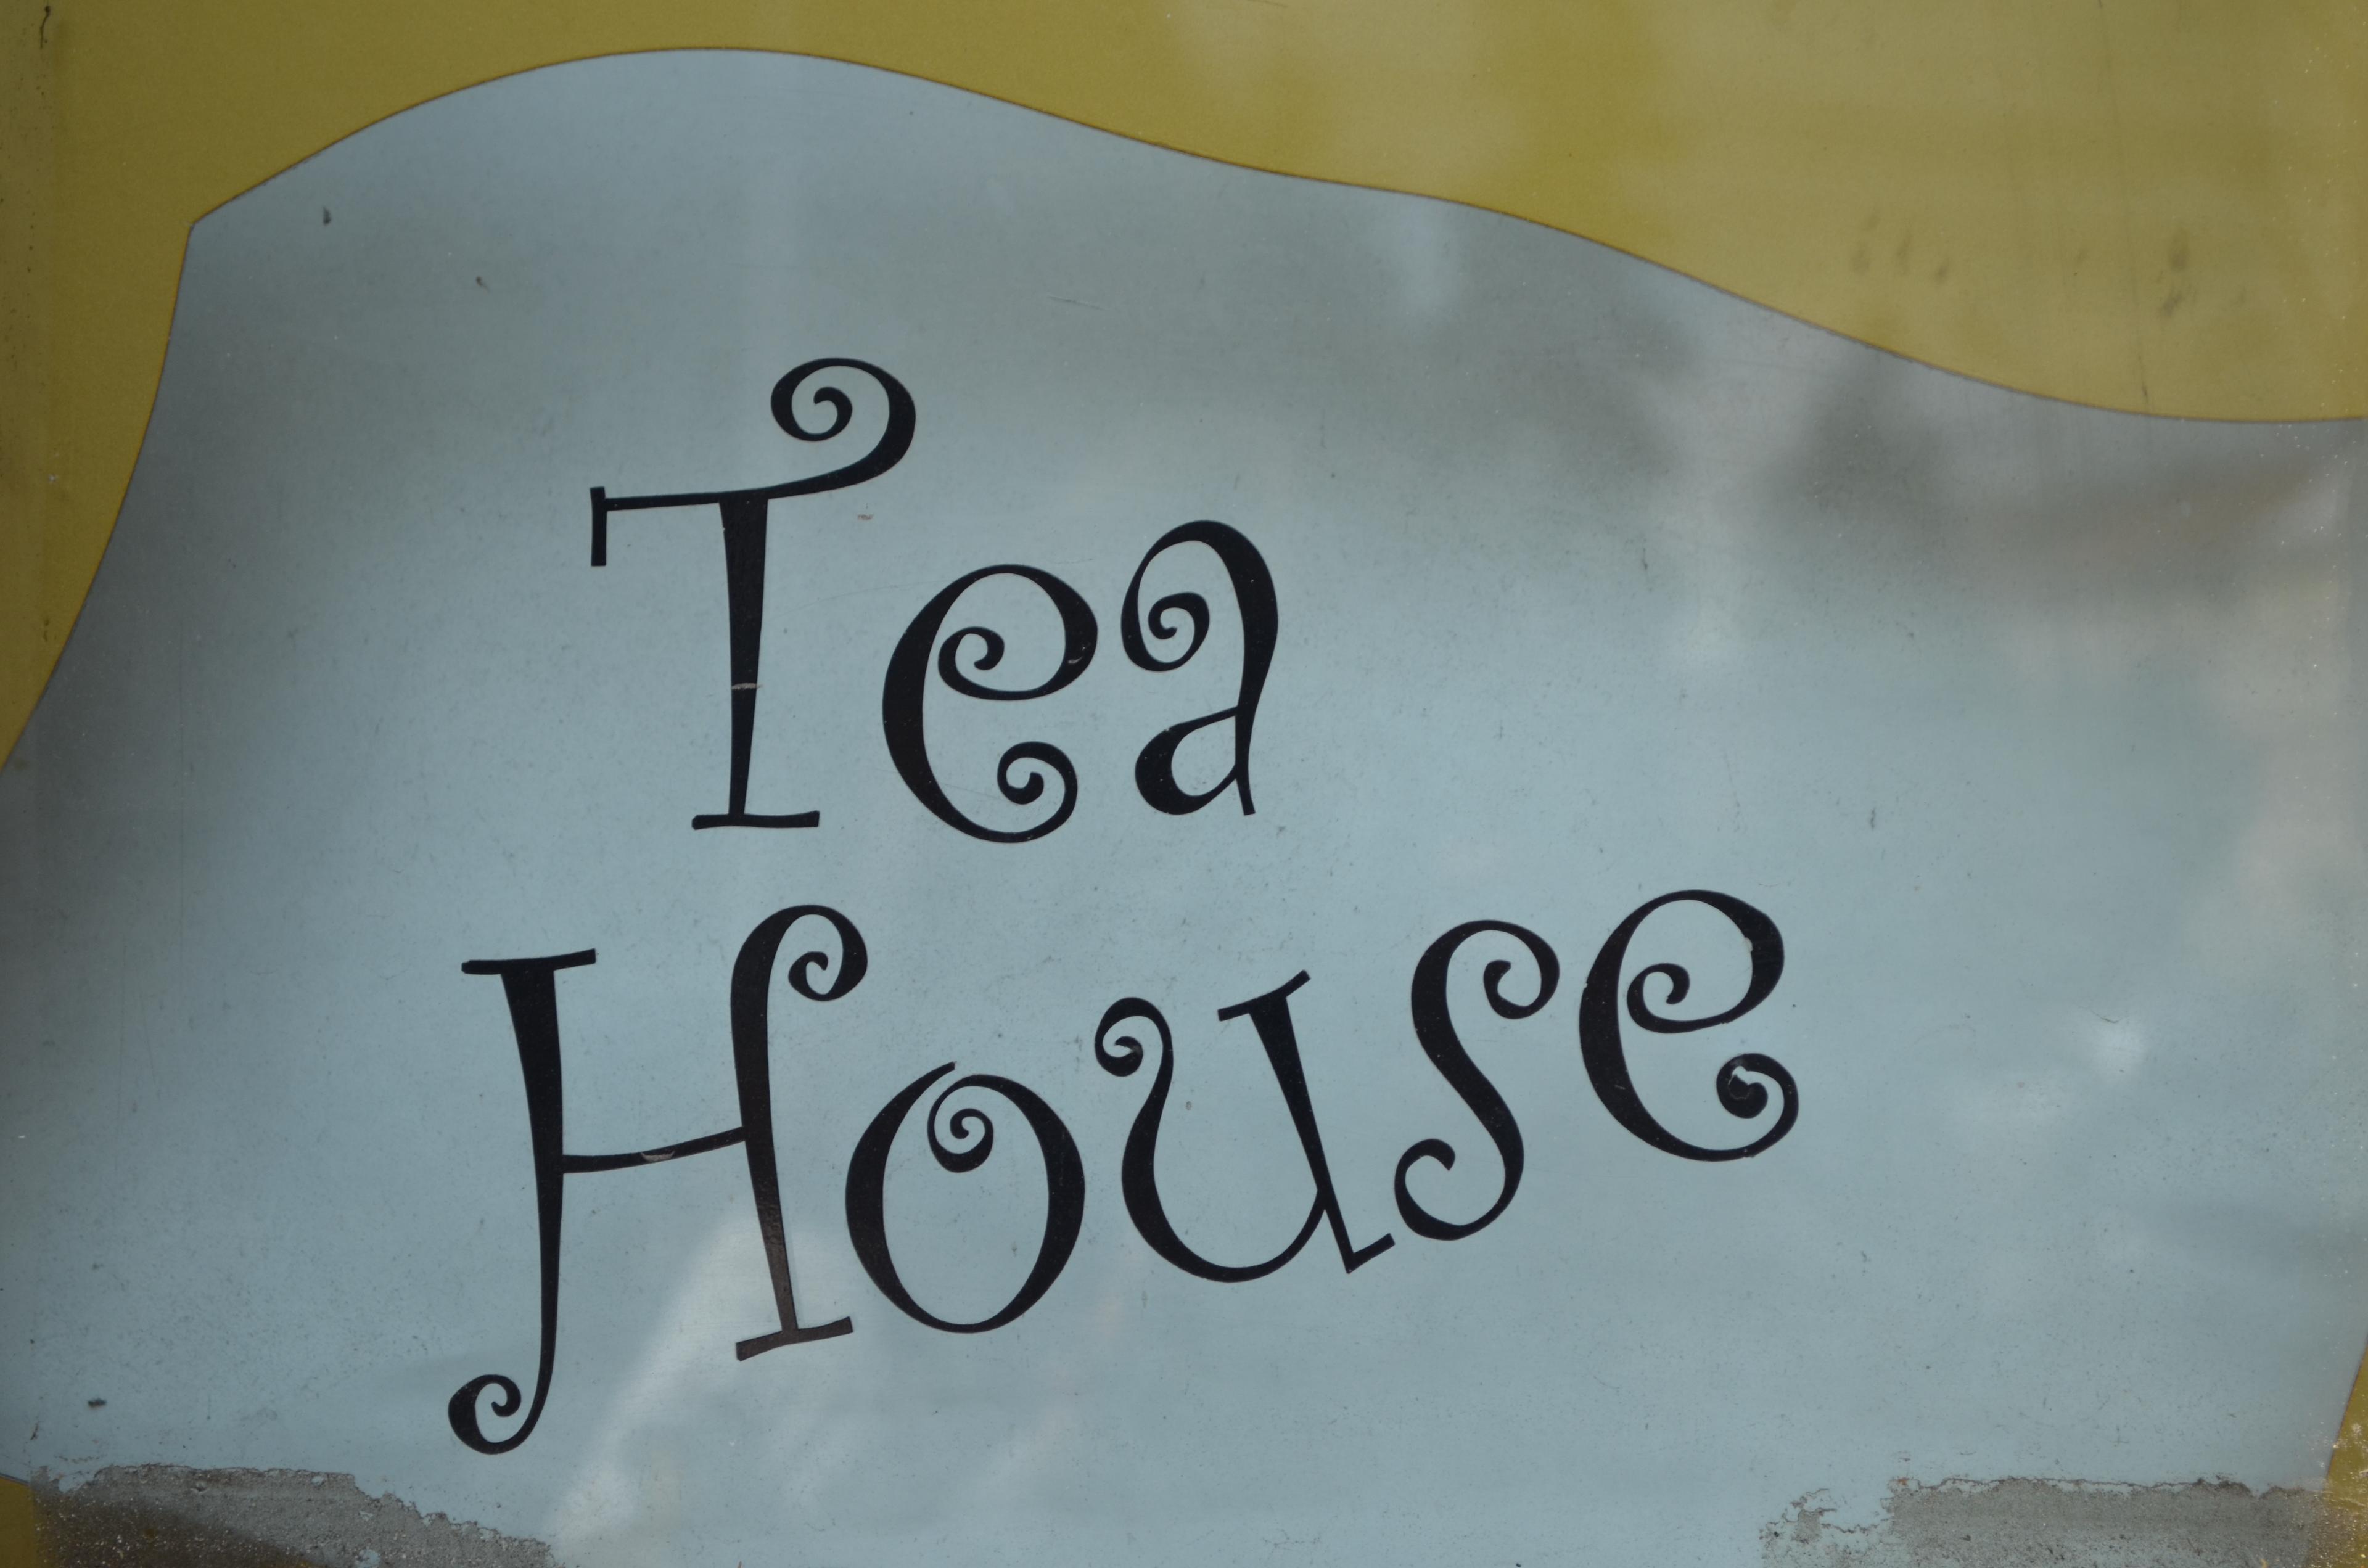 Cover image of this place Flowers Tea Bar